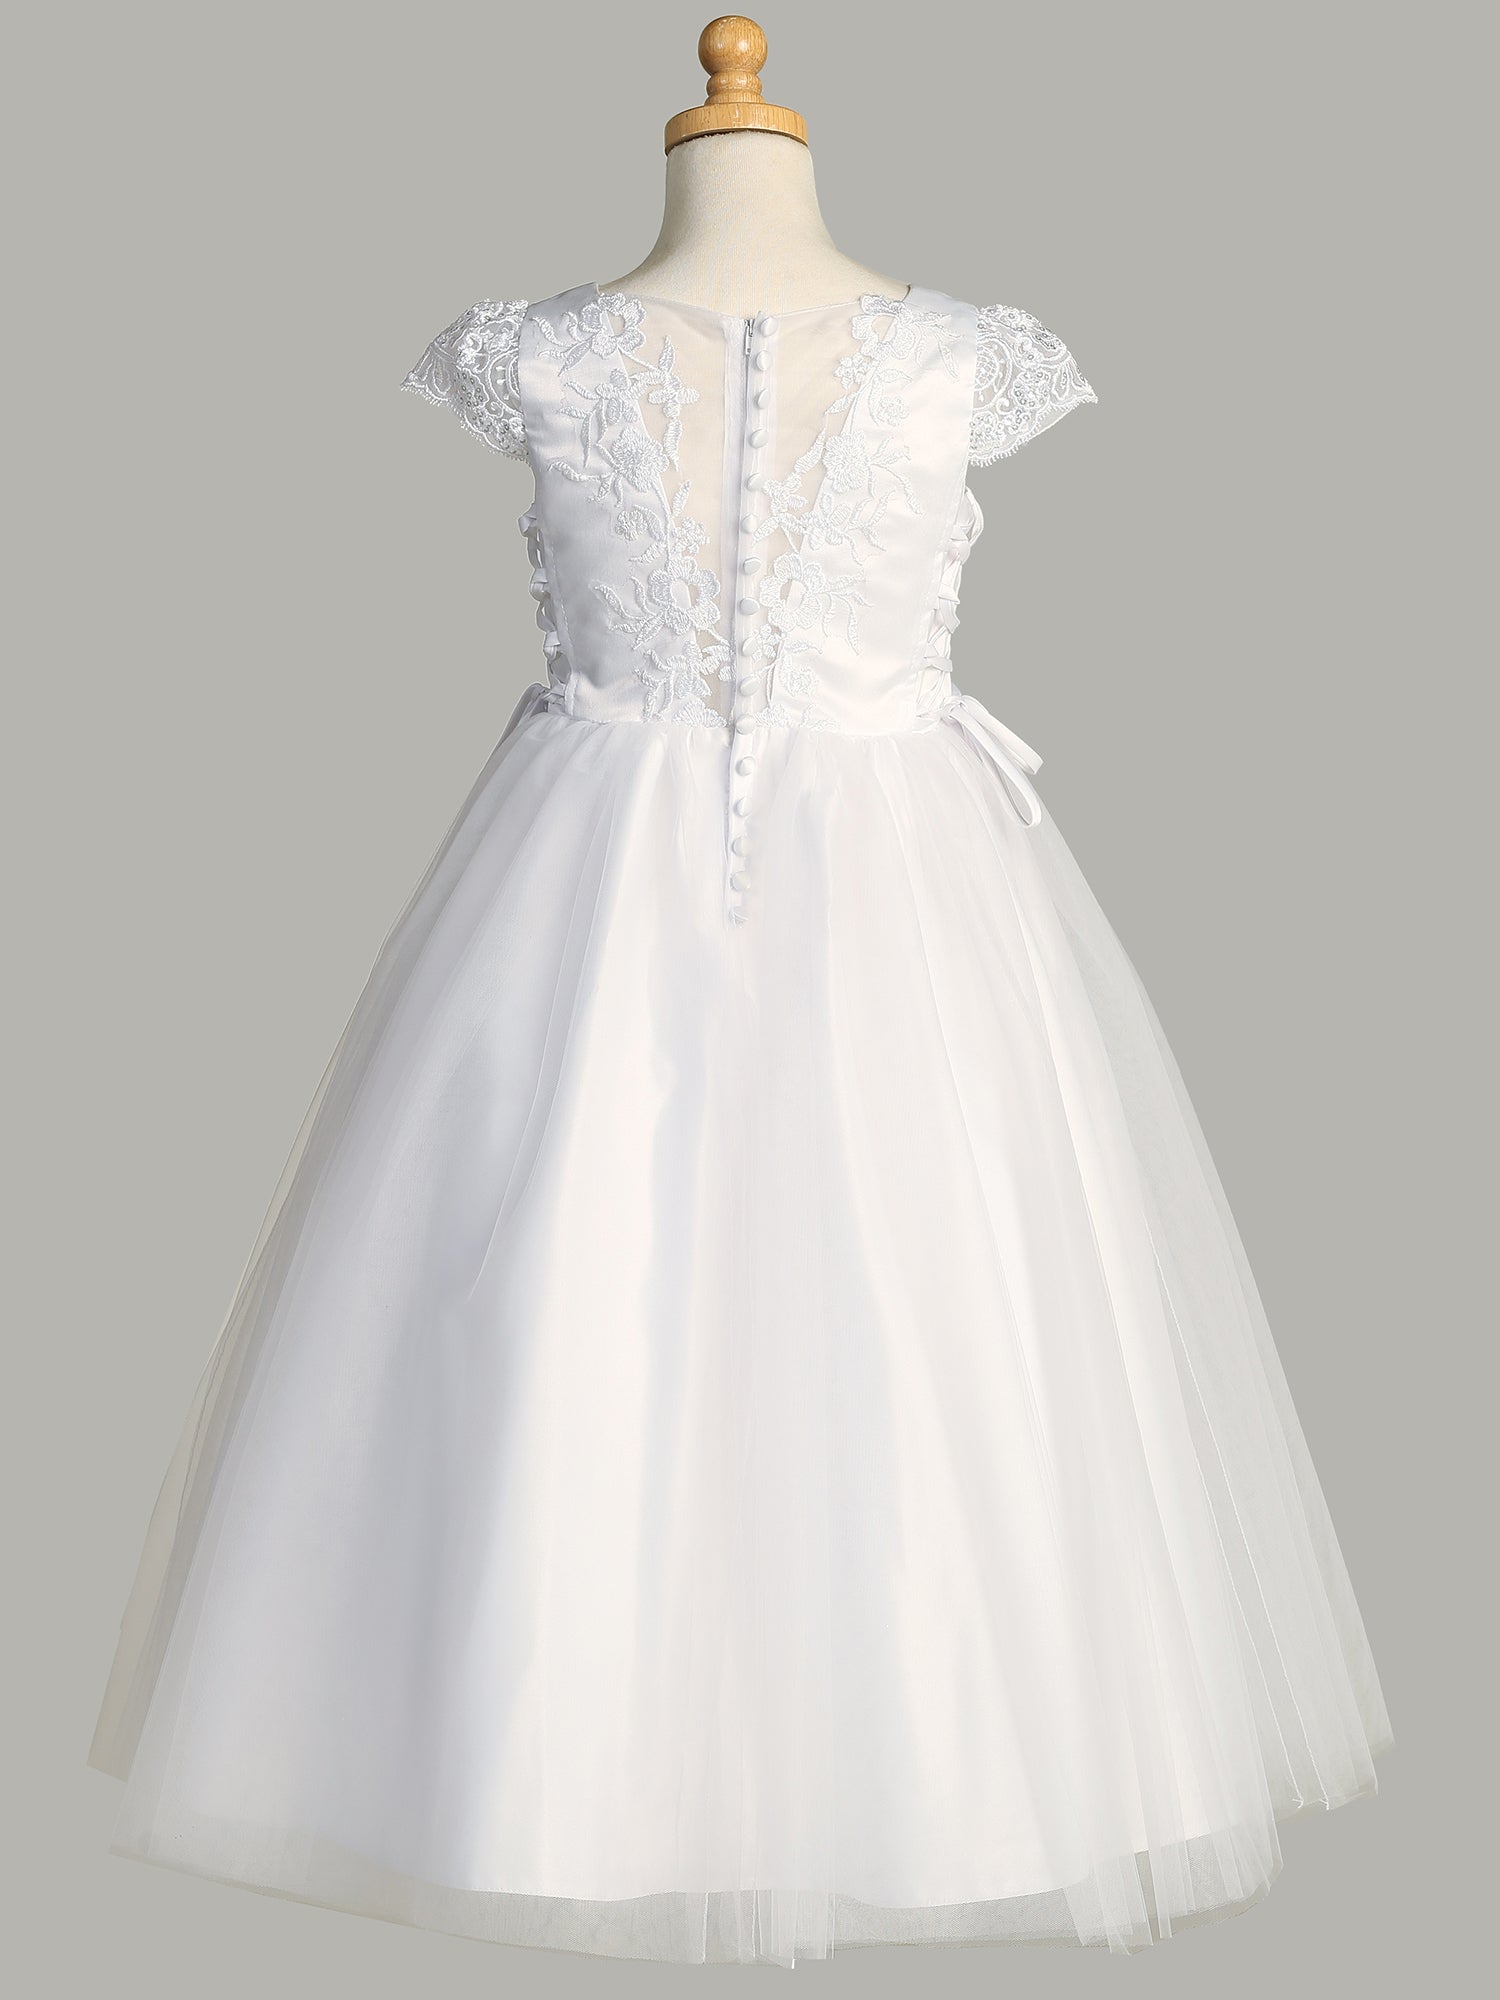 Side view of the First Communion Dress showing the corset sides and satin buttons.